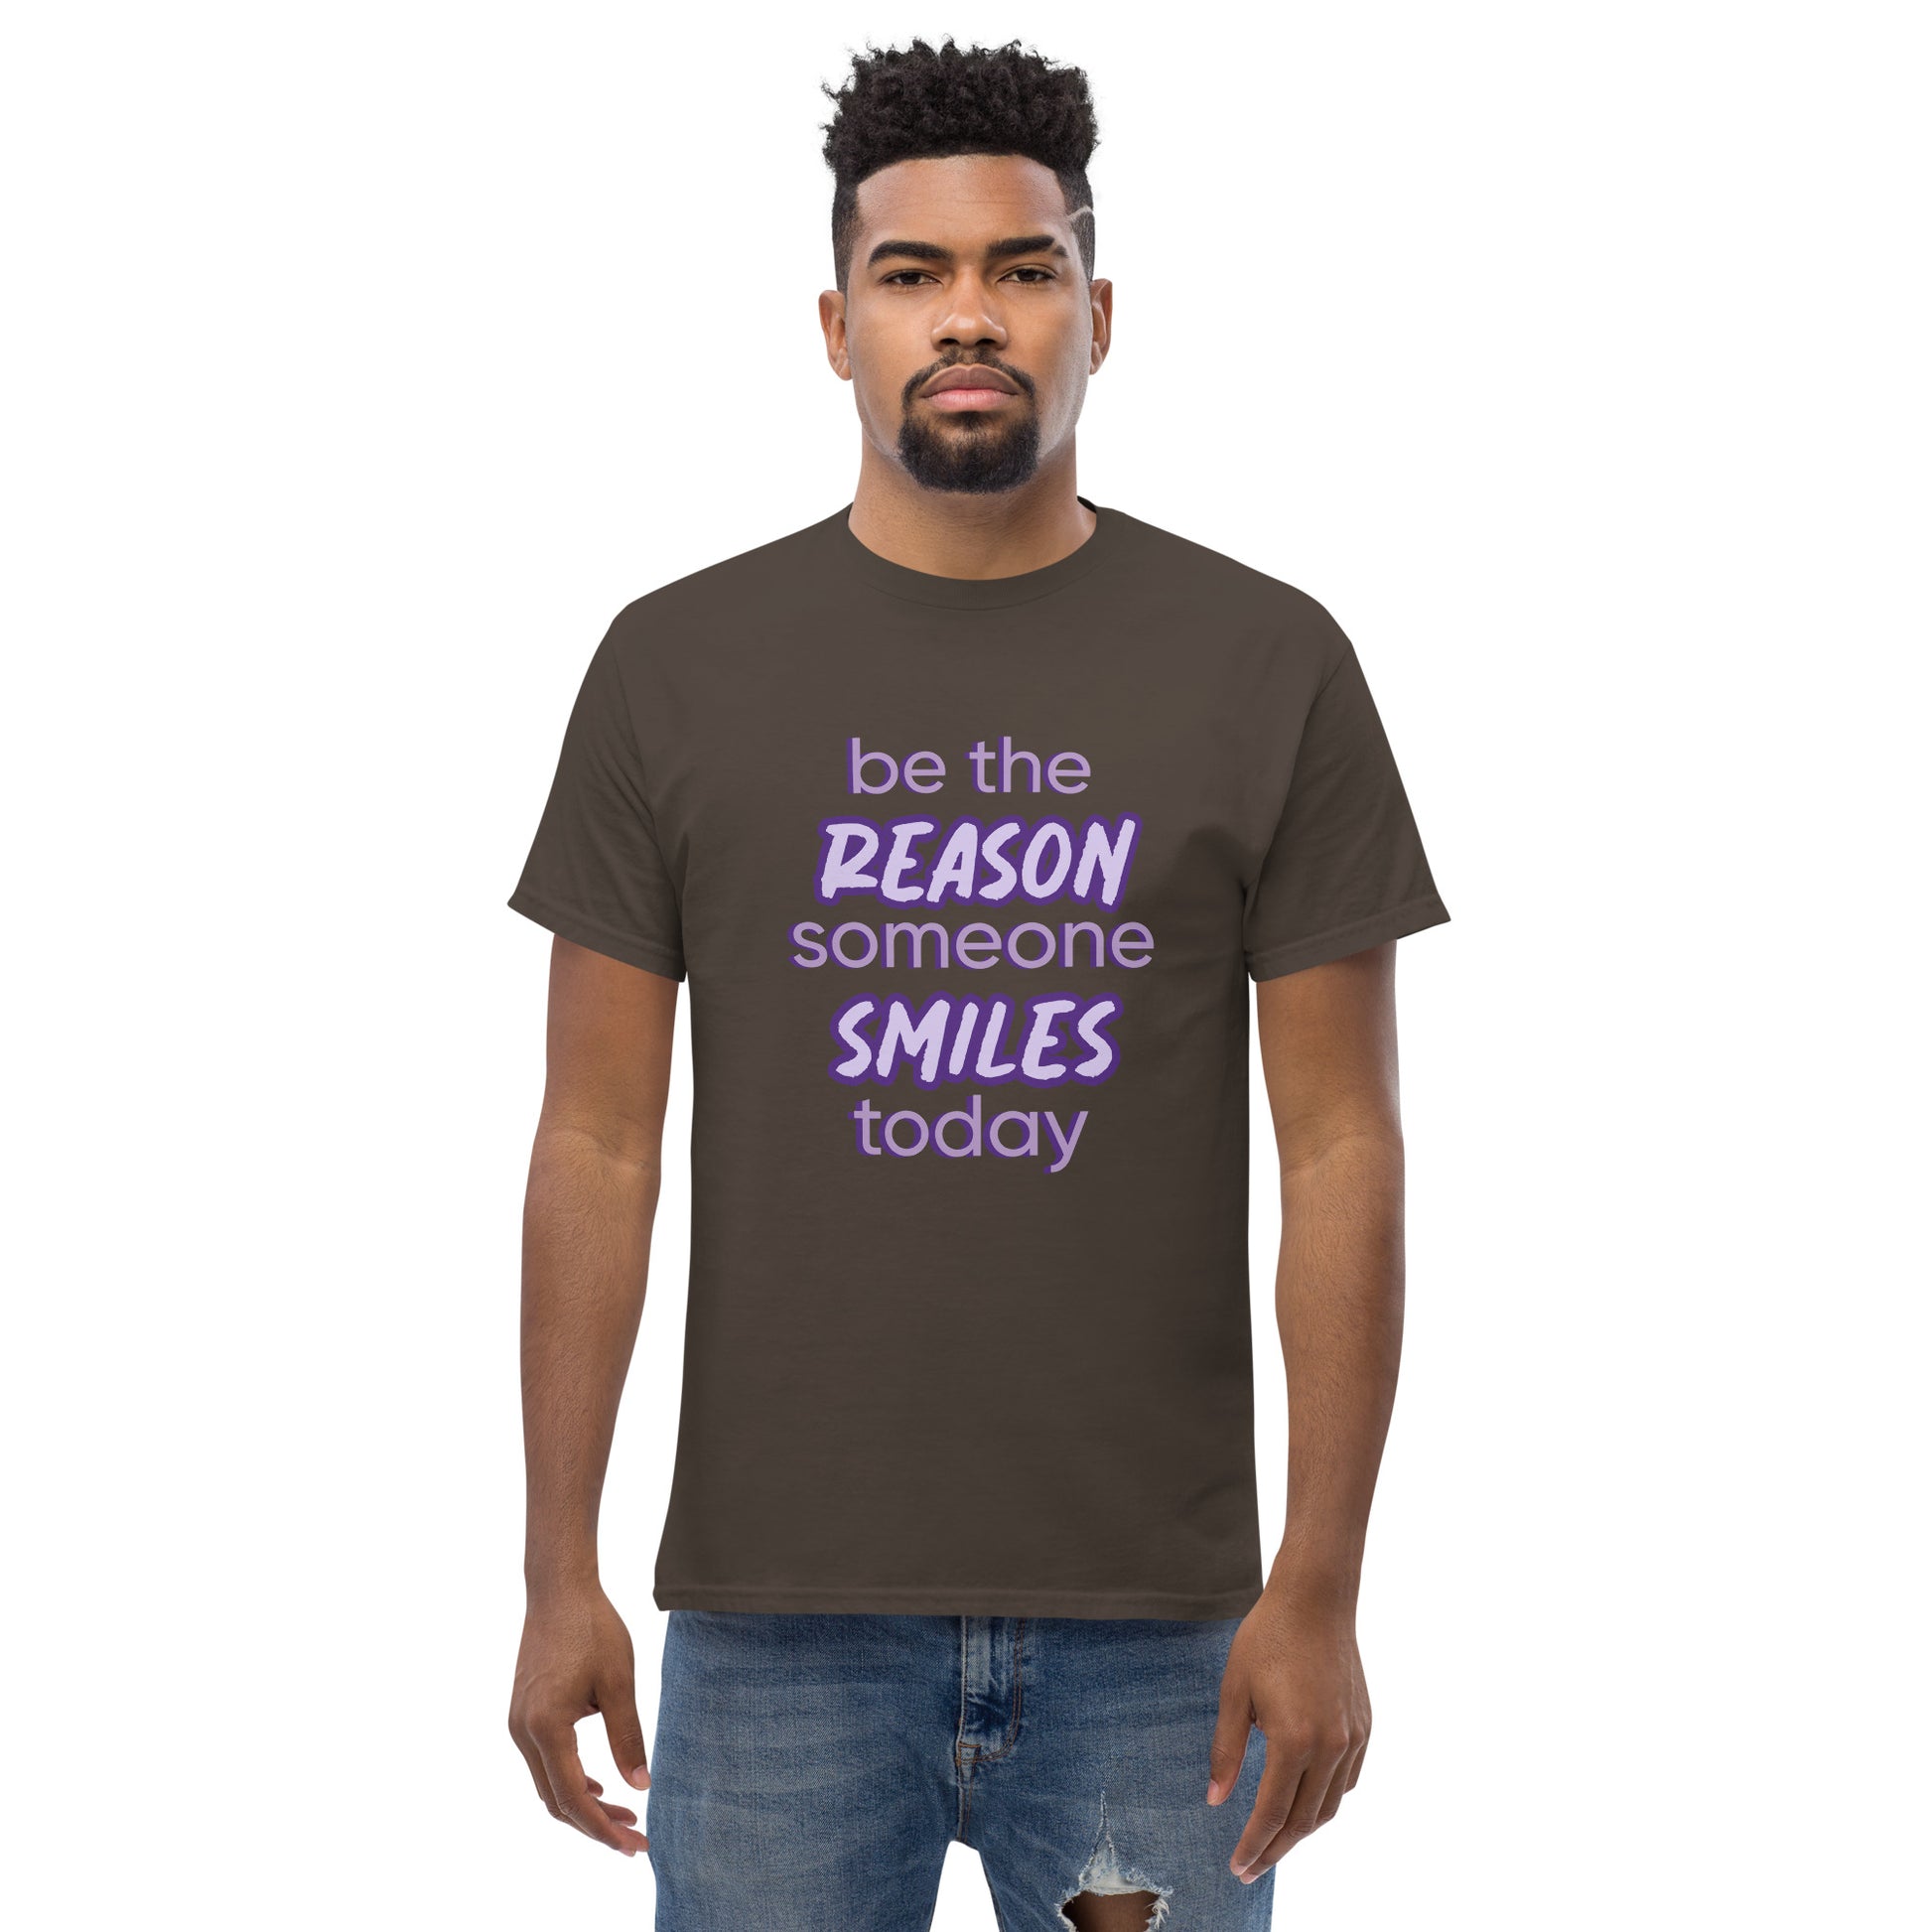 Men with dark chocolate T-shirt and the quote "be the reason someone smiles today" in purple on it. 